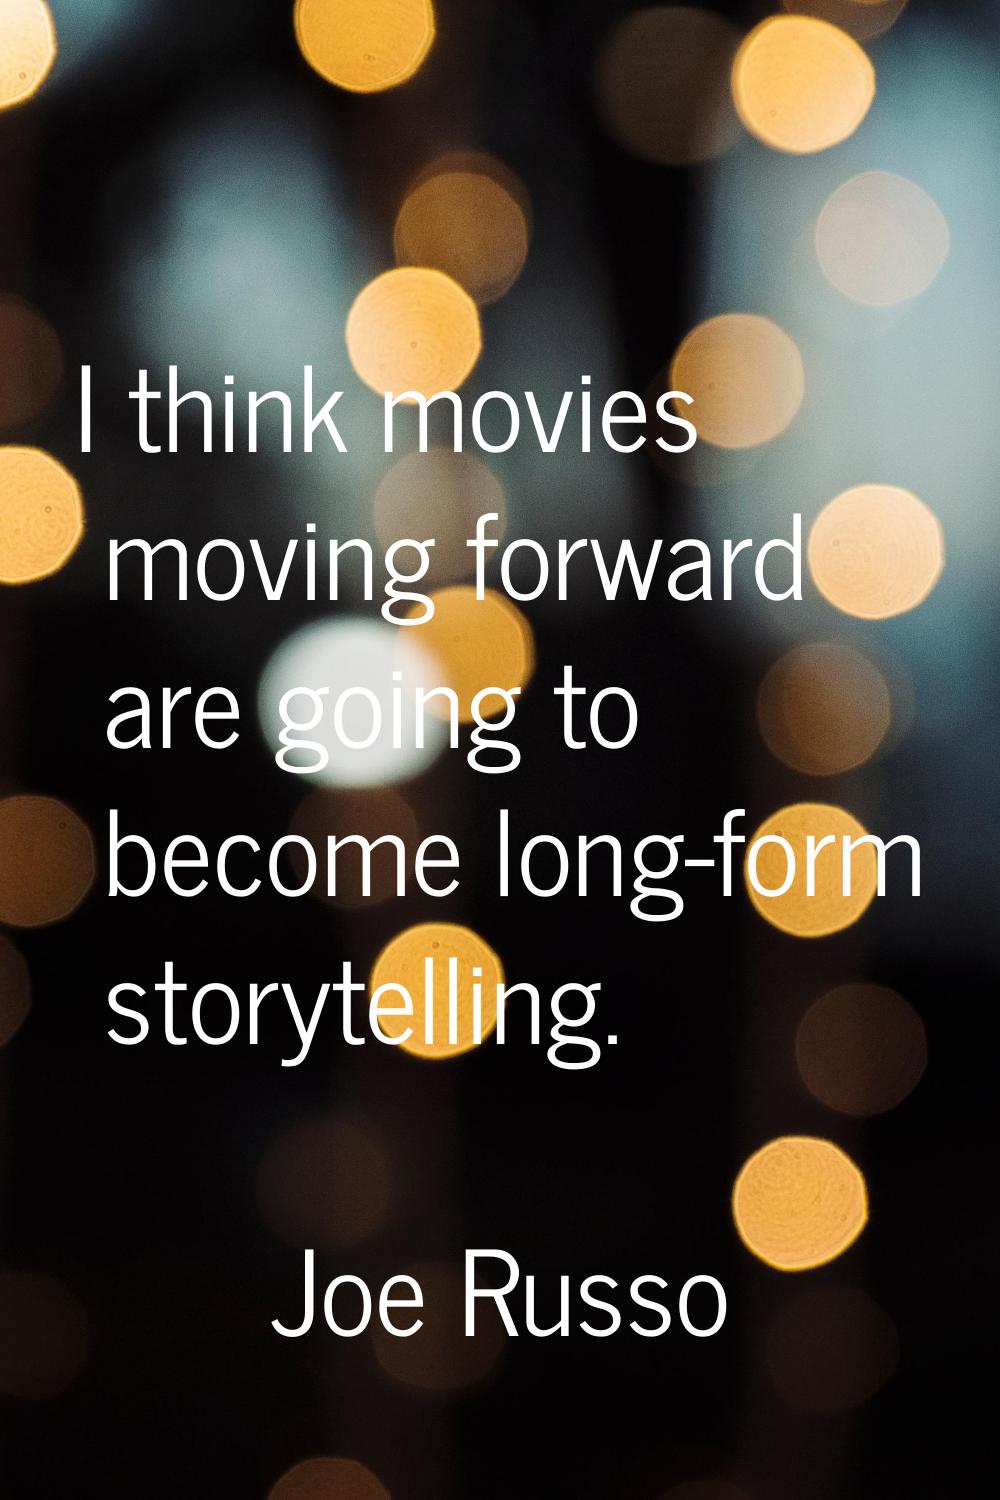 I think movies moving forward are going to become long-form storytelling.